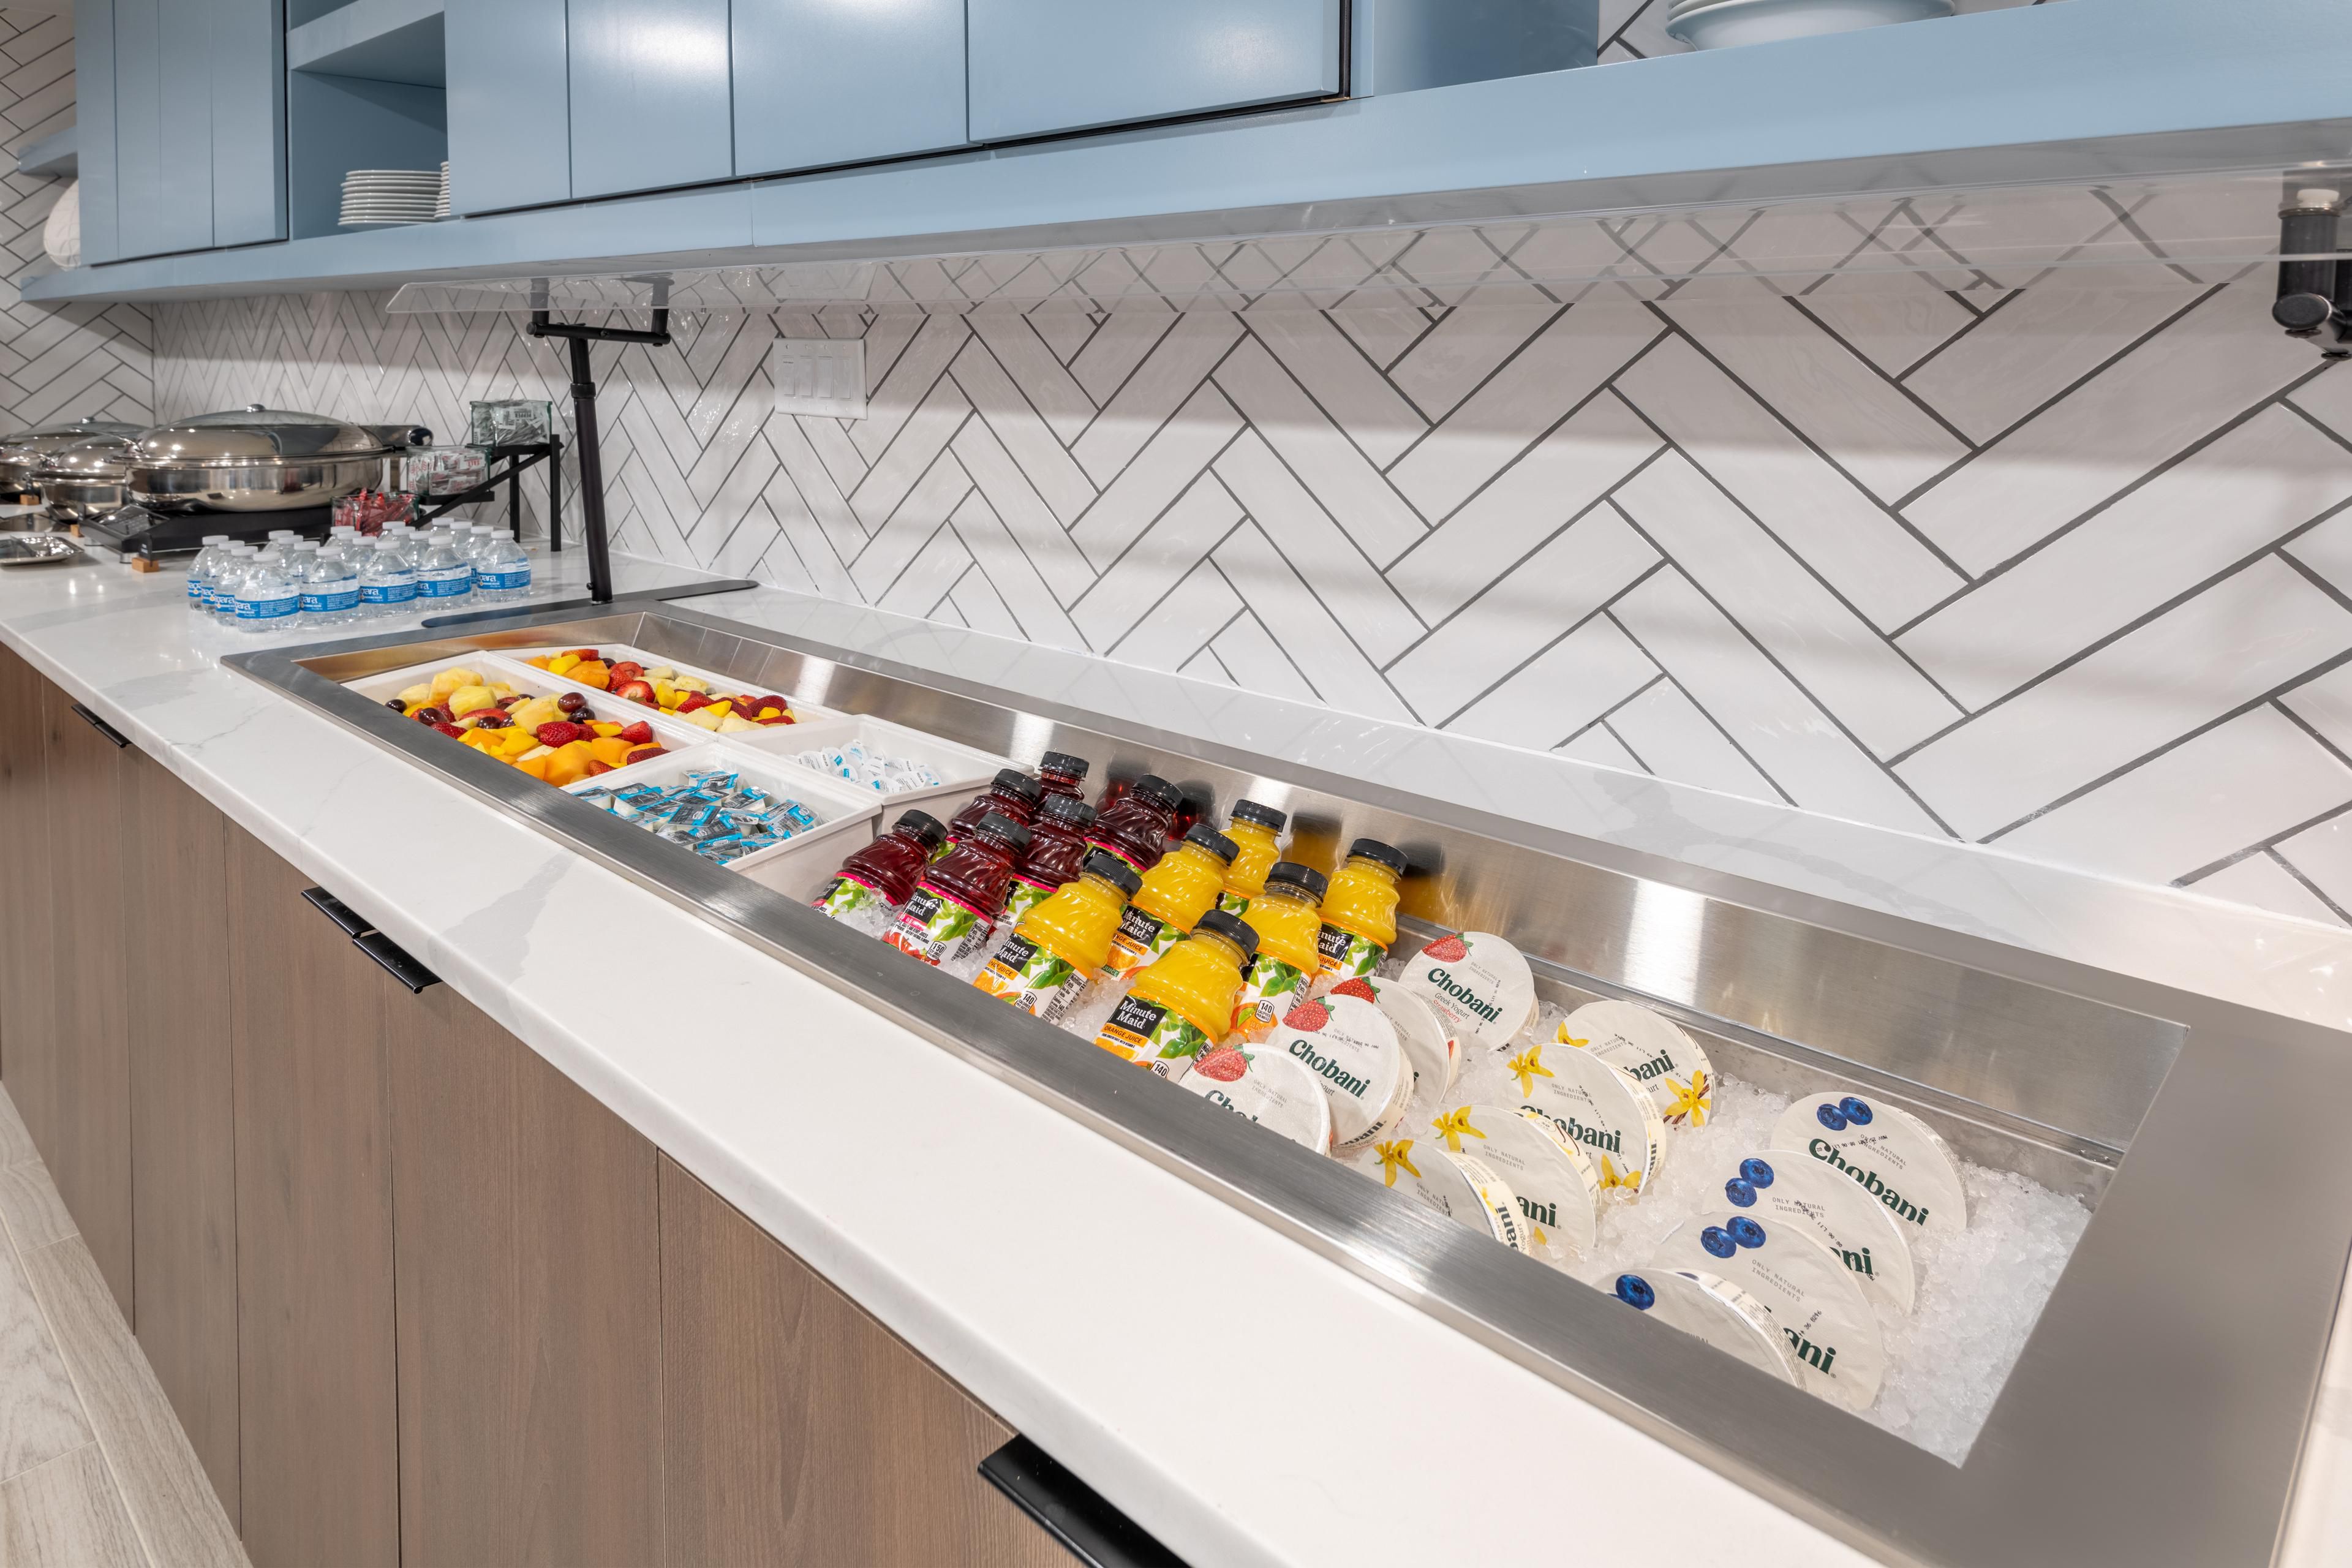 Our hotel’s complimentary breakfast features an attendant-served hot breakfast with eggs, bacon or sausage, and a variety of continental breakfast items.